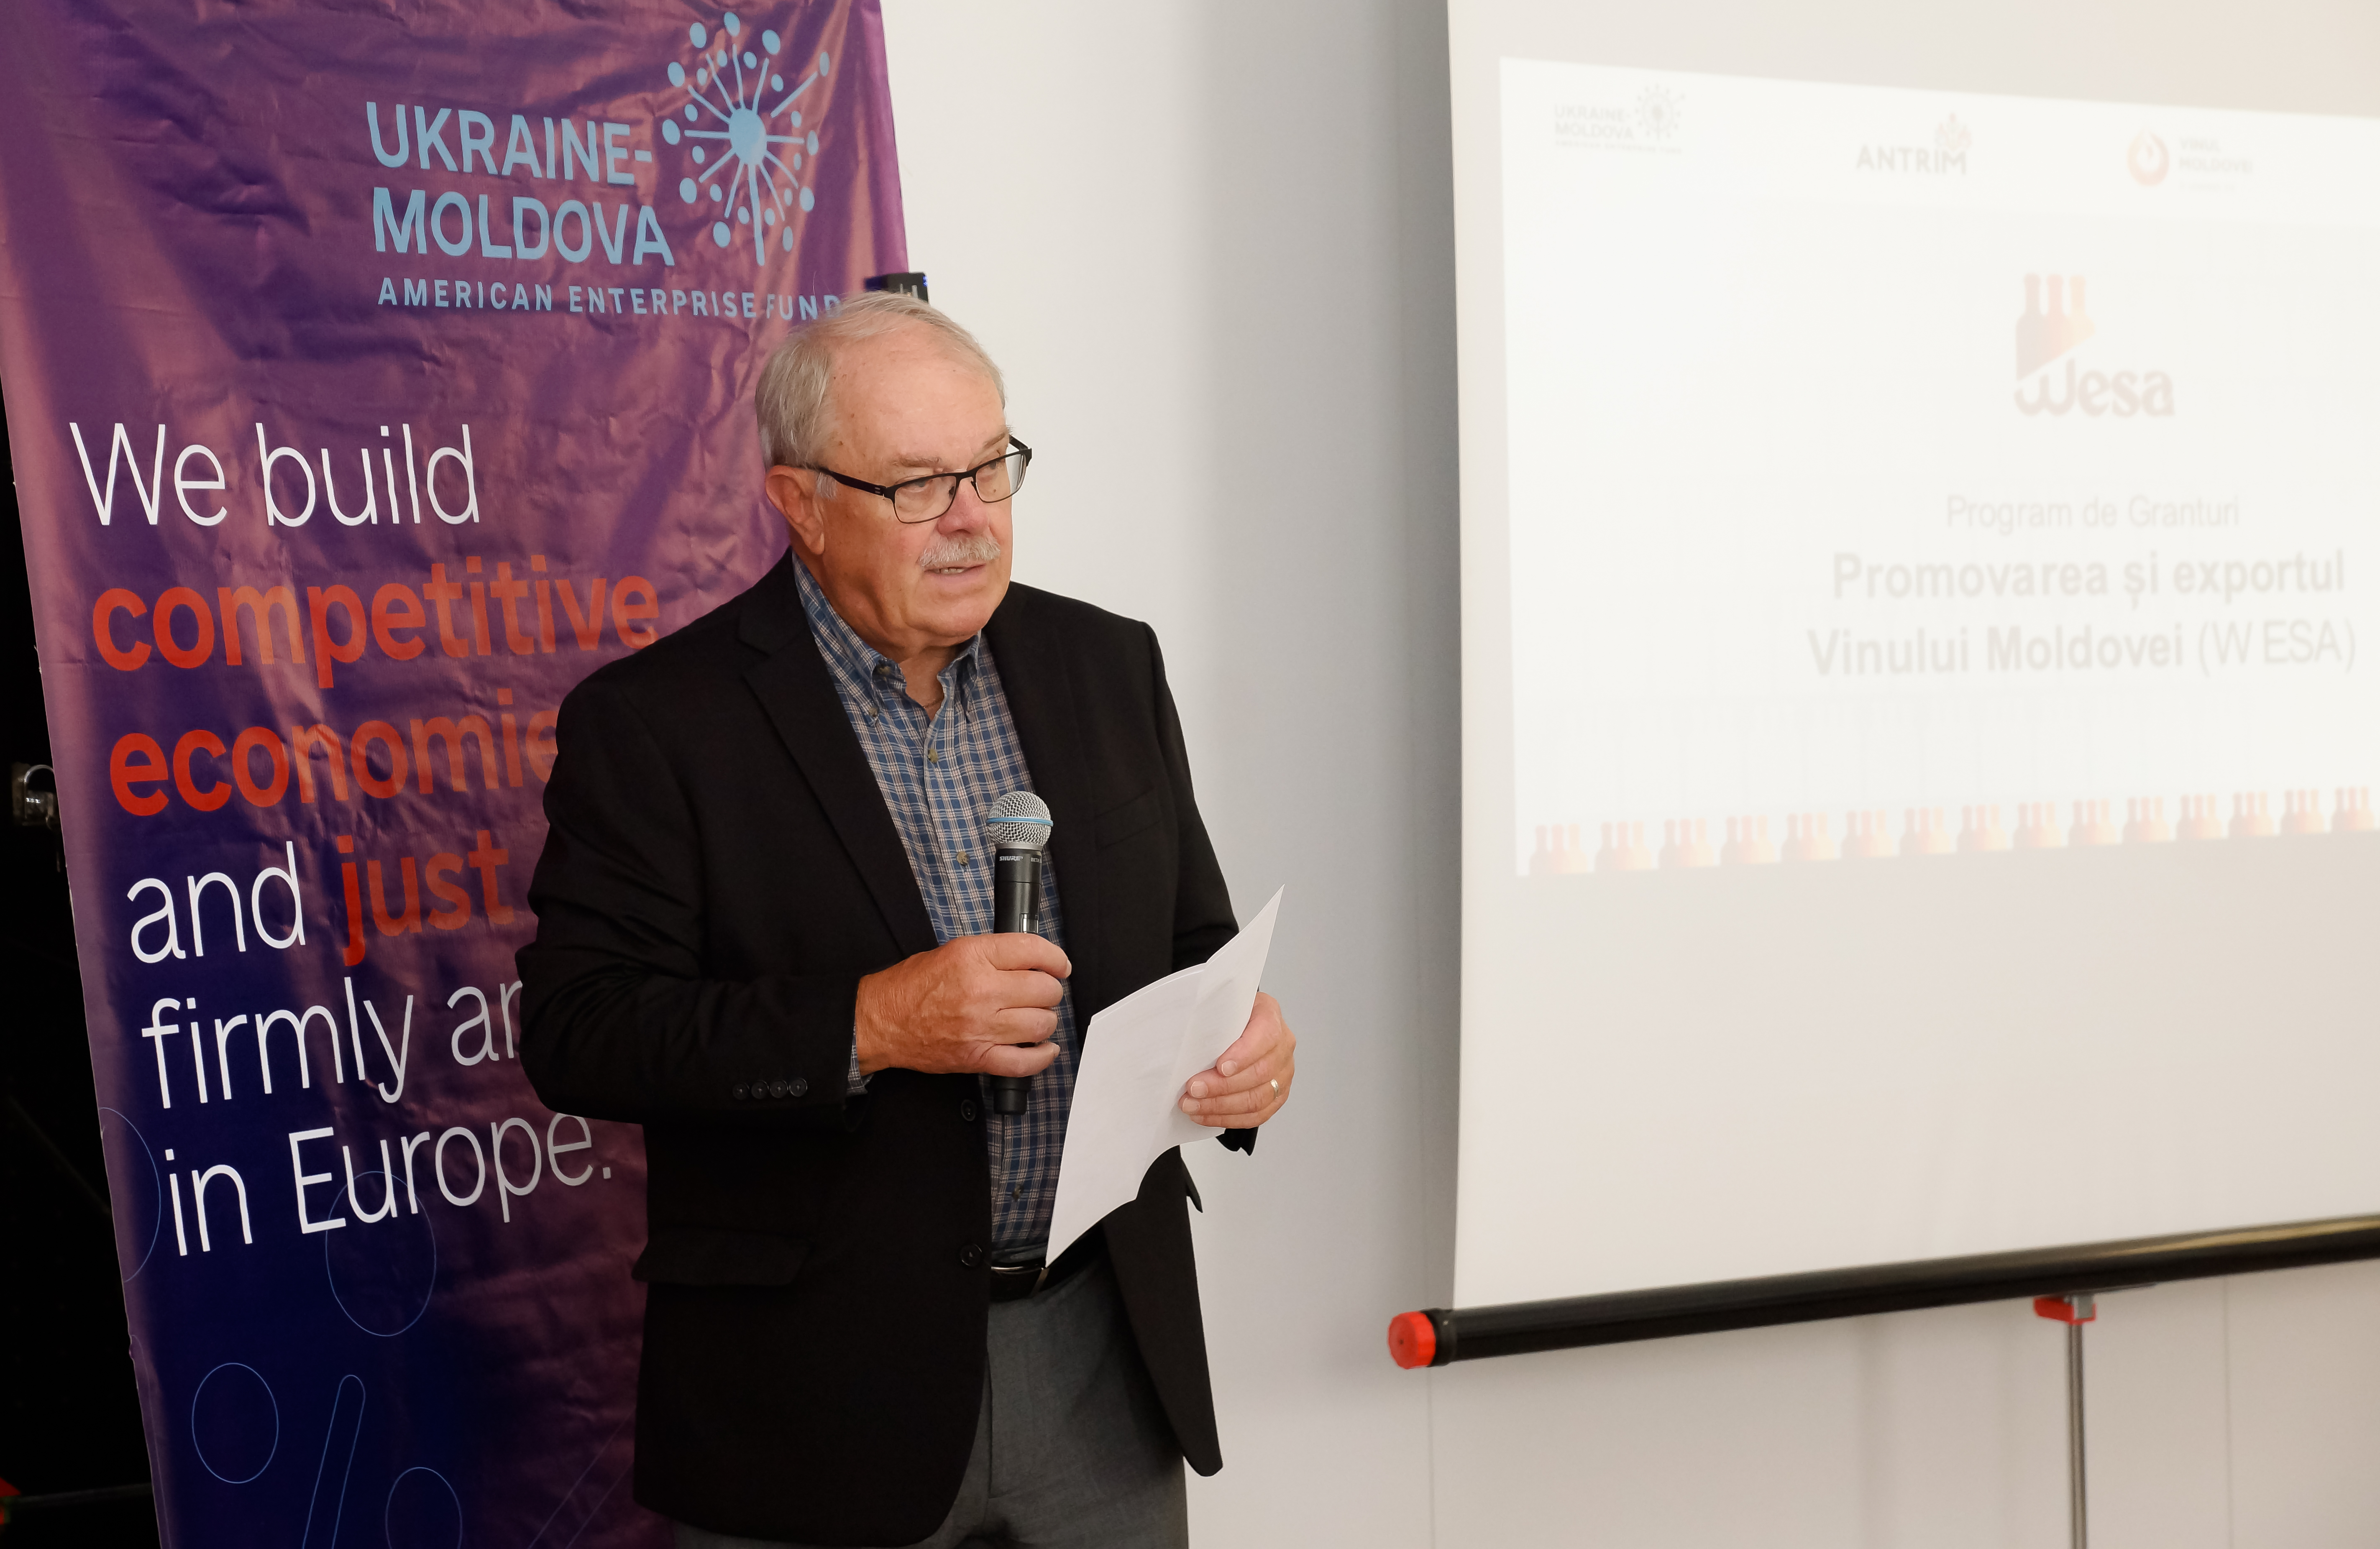 WESA grant program for Moldovan wine exporters is launched with the support of Ukraine-Moldova American Enterprise Fund picture